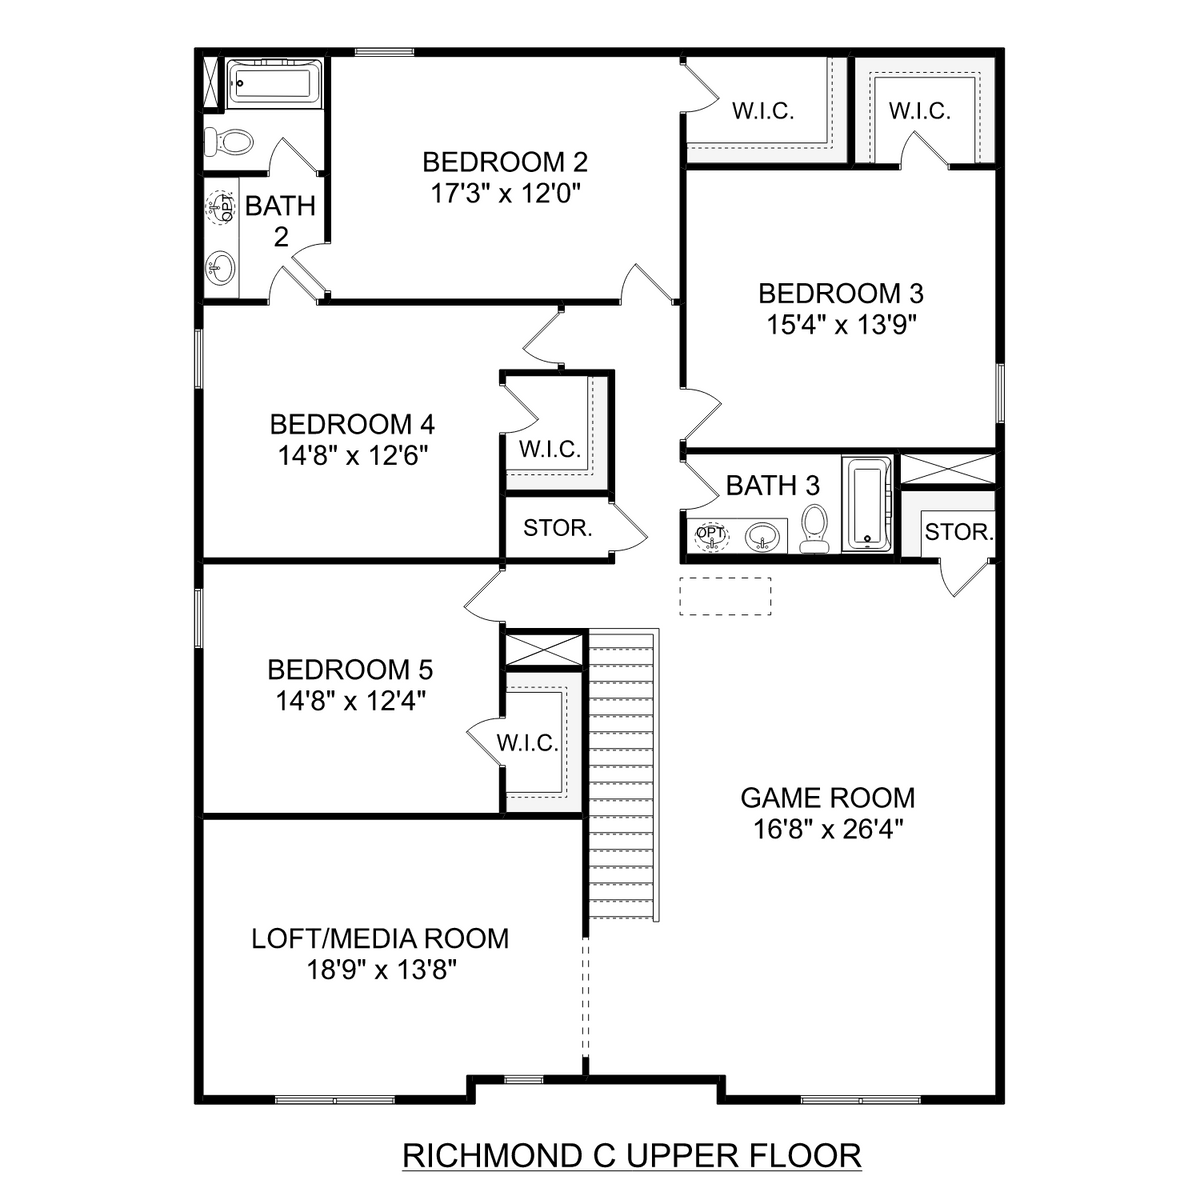 2 - The Richmond C floor plan layout for 143 Cherry Laurel Drive in Davidson Homes' Clearview community.